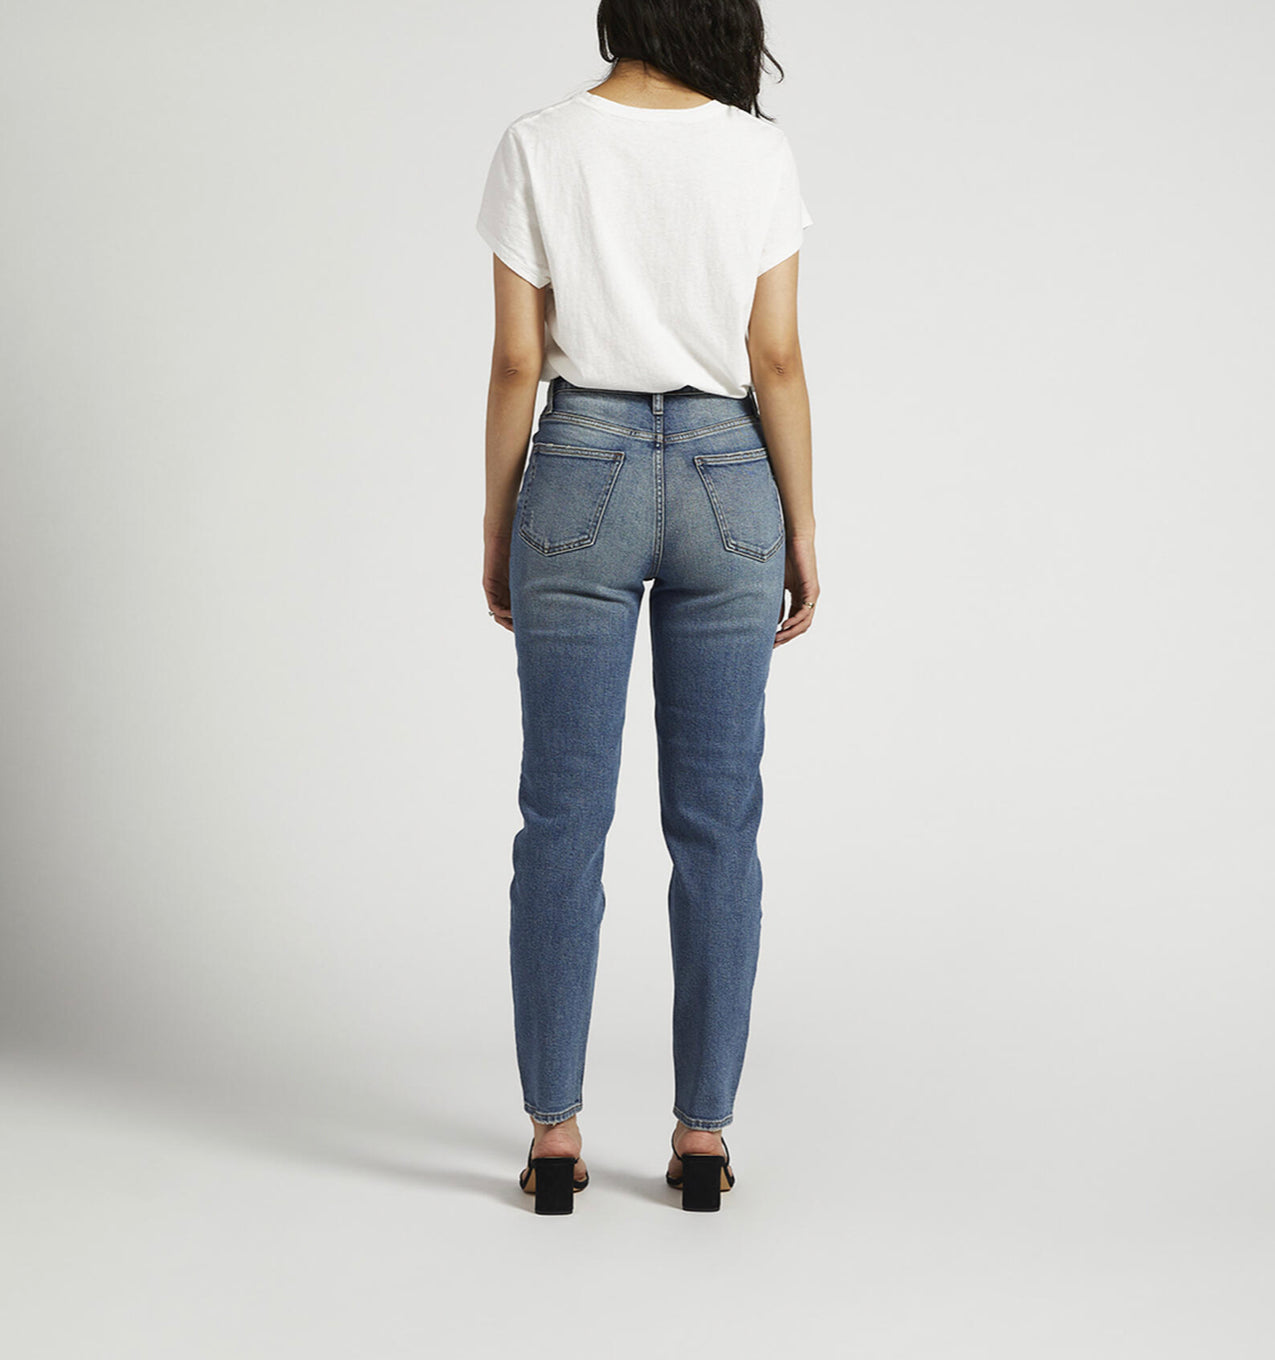 SILVER HIGH RISE TAPERED LEG MOM JEAN